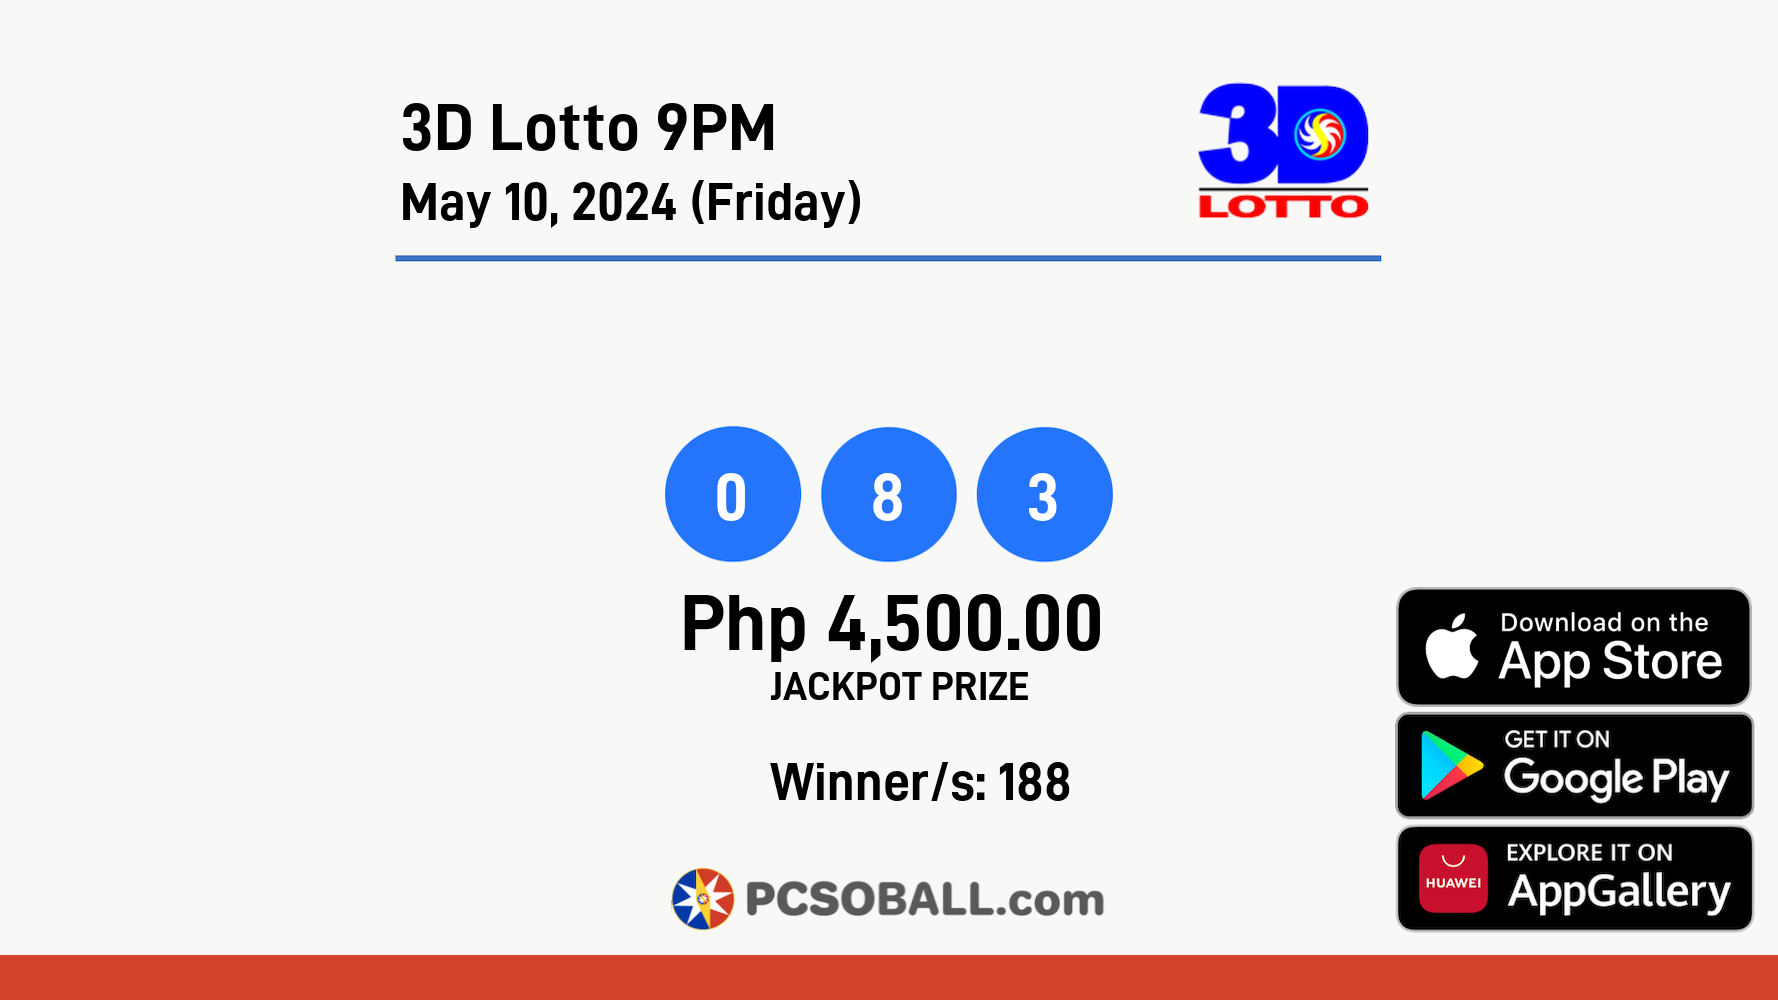 3D Lotto 9PM May 10, 2024 (Friday) Result